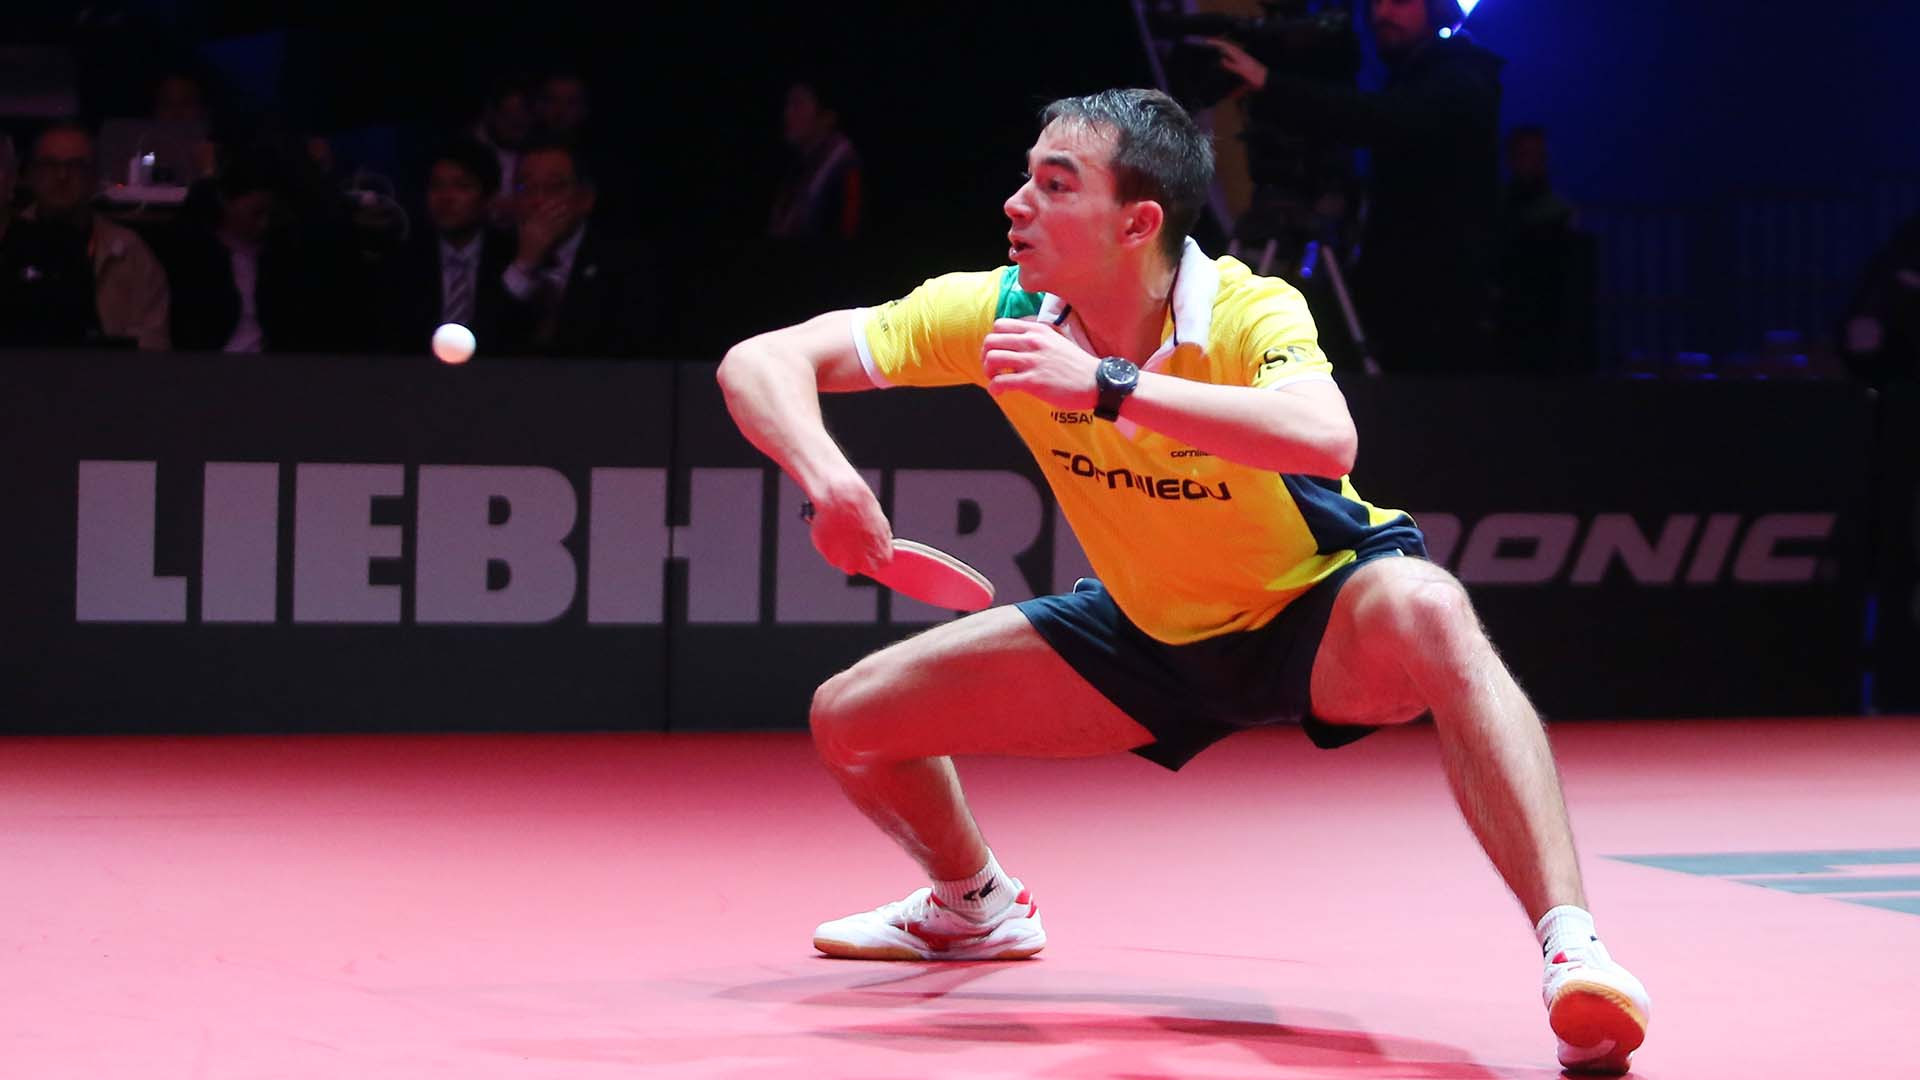 Brazil's Hugo Calderano was dumped out at the group stage of the International Table Tennis Federation Men's World Cup in Paris David Owen ©ITTF